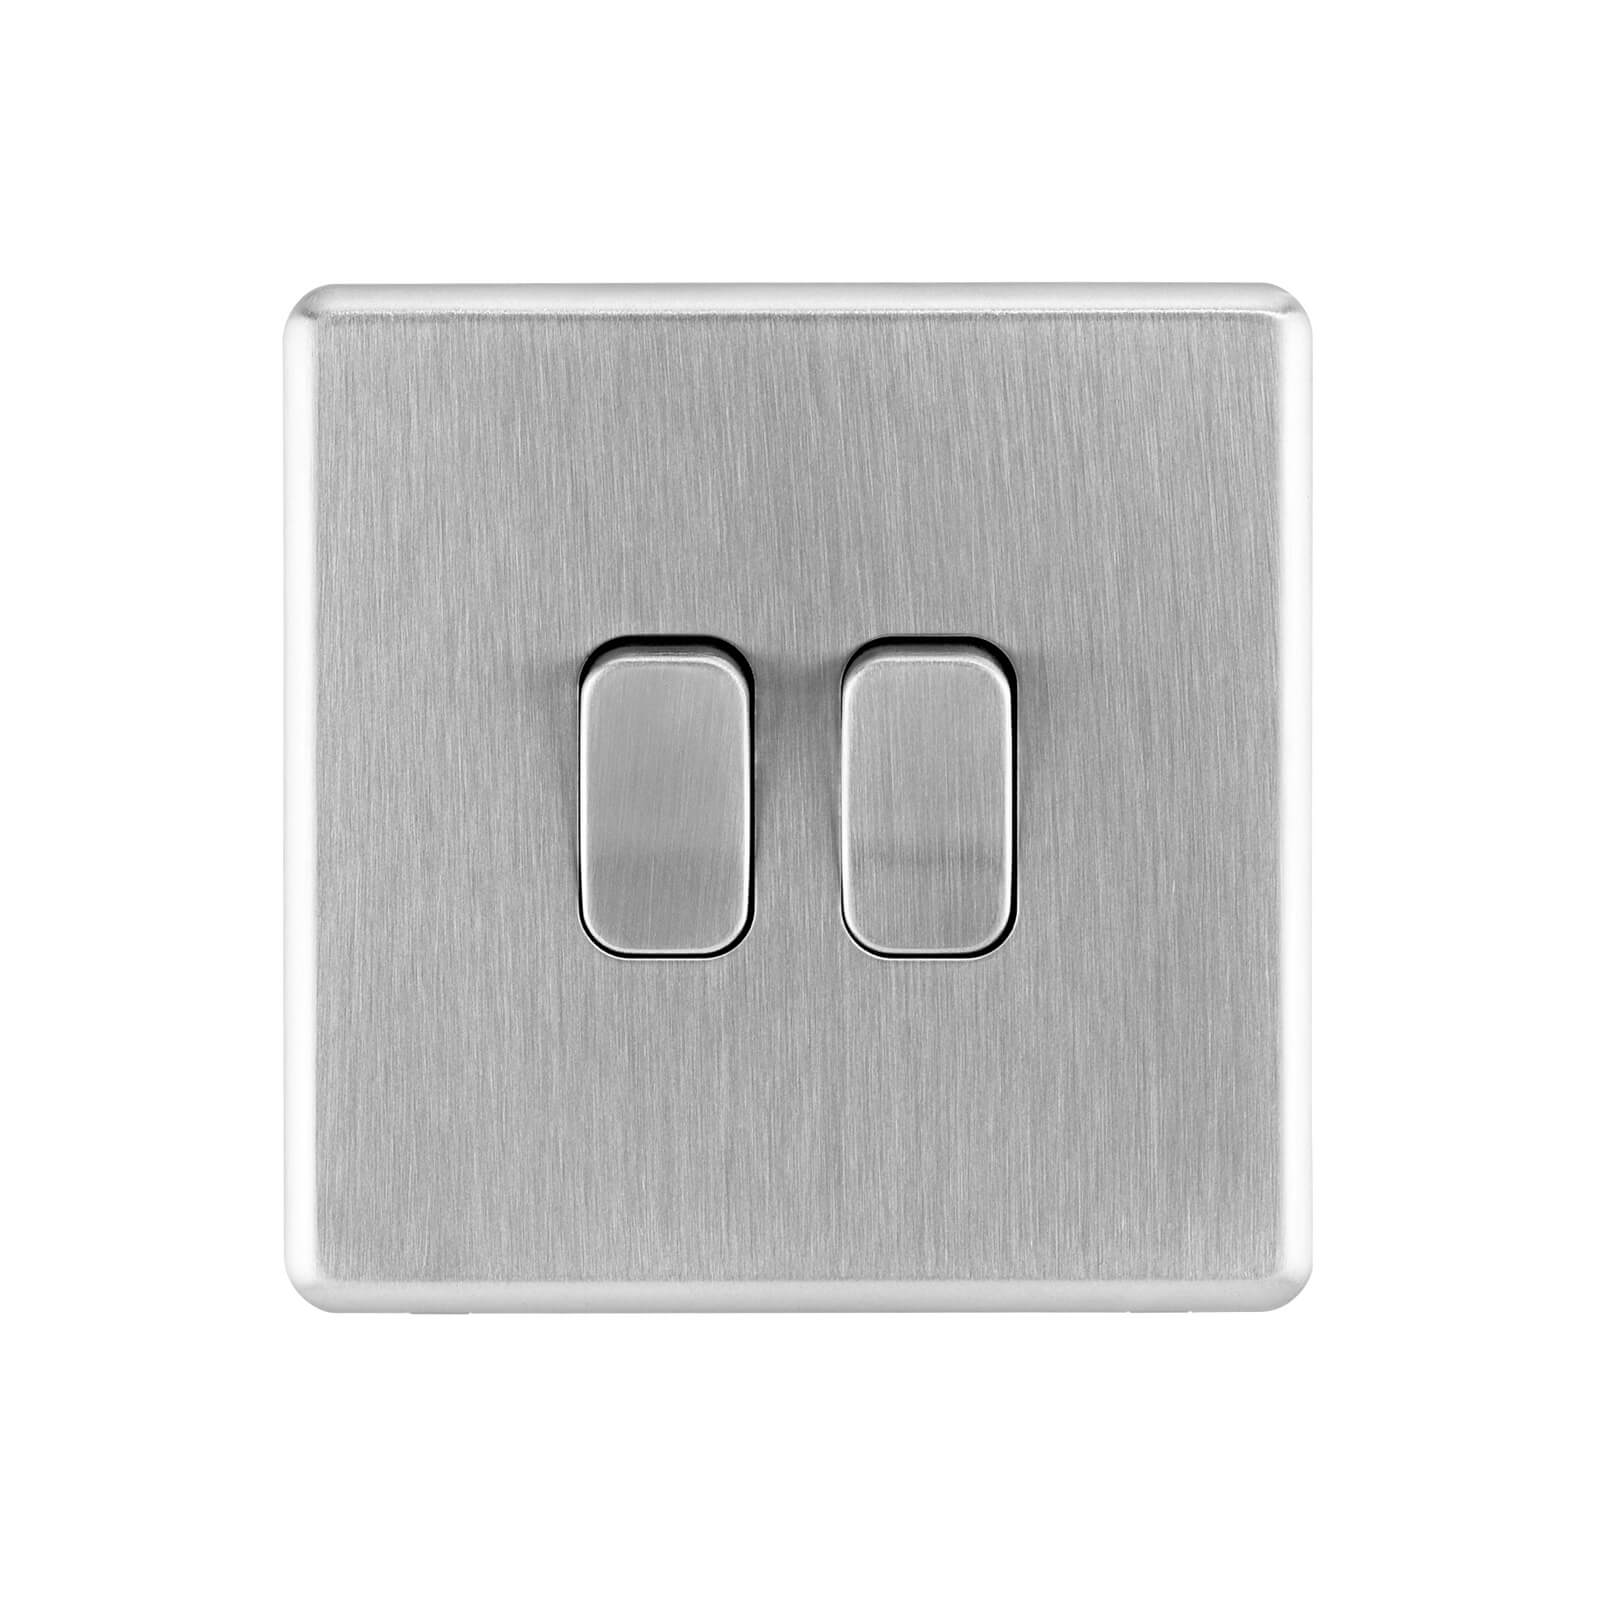 Arlec Fusion 10A 2Gang 2Way Stainless Steel Double light switch